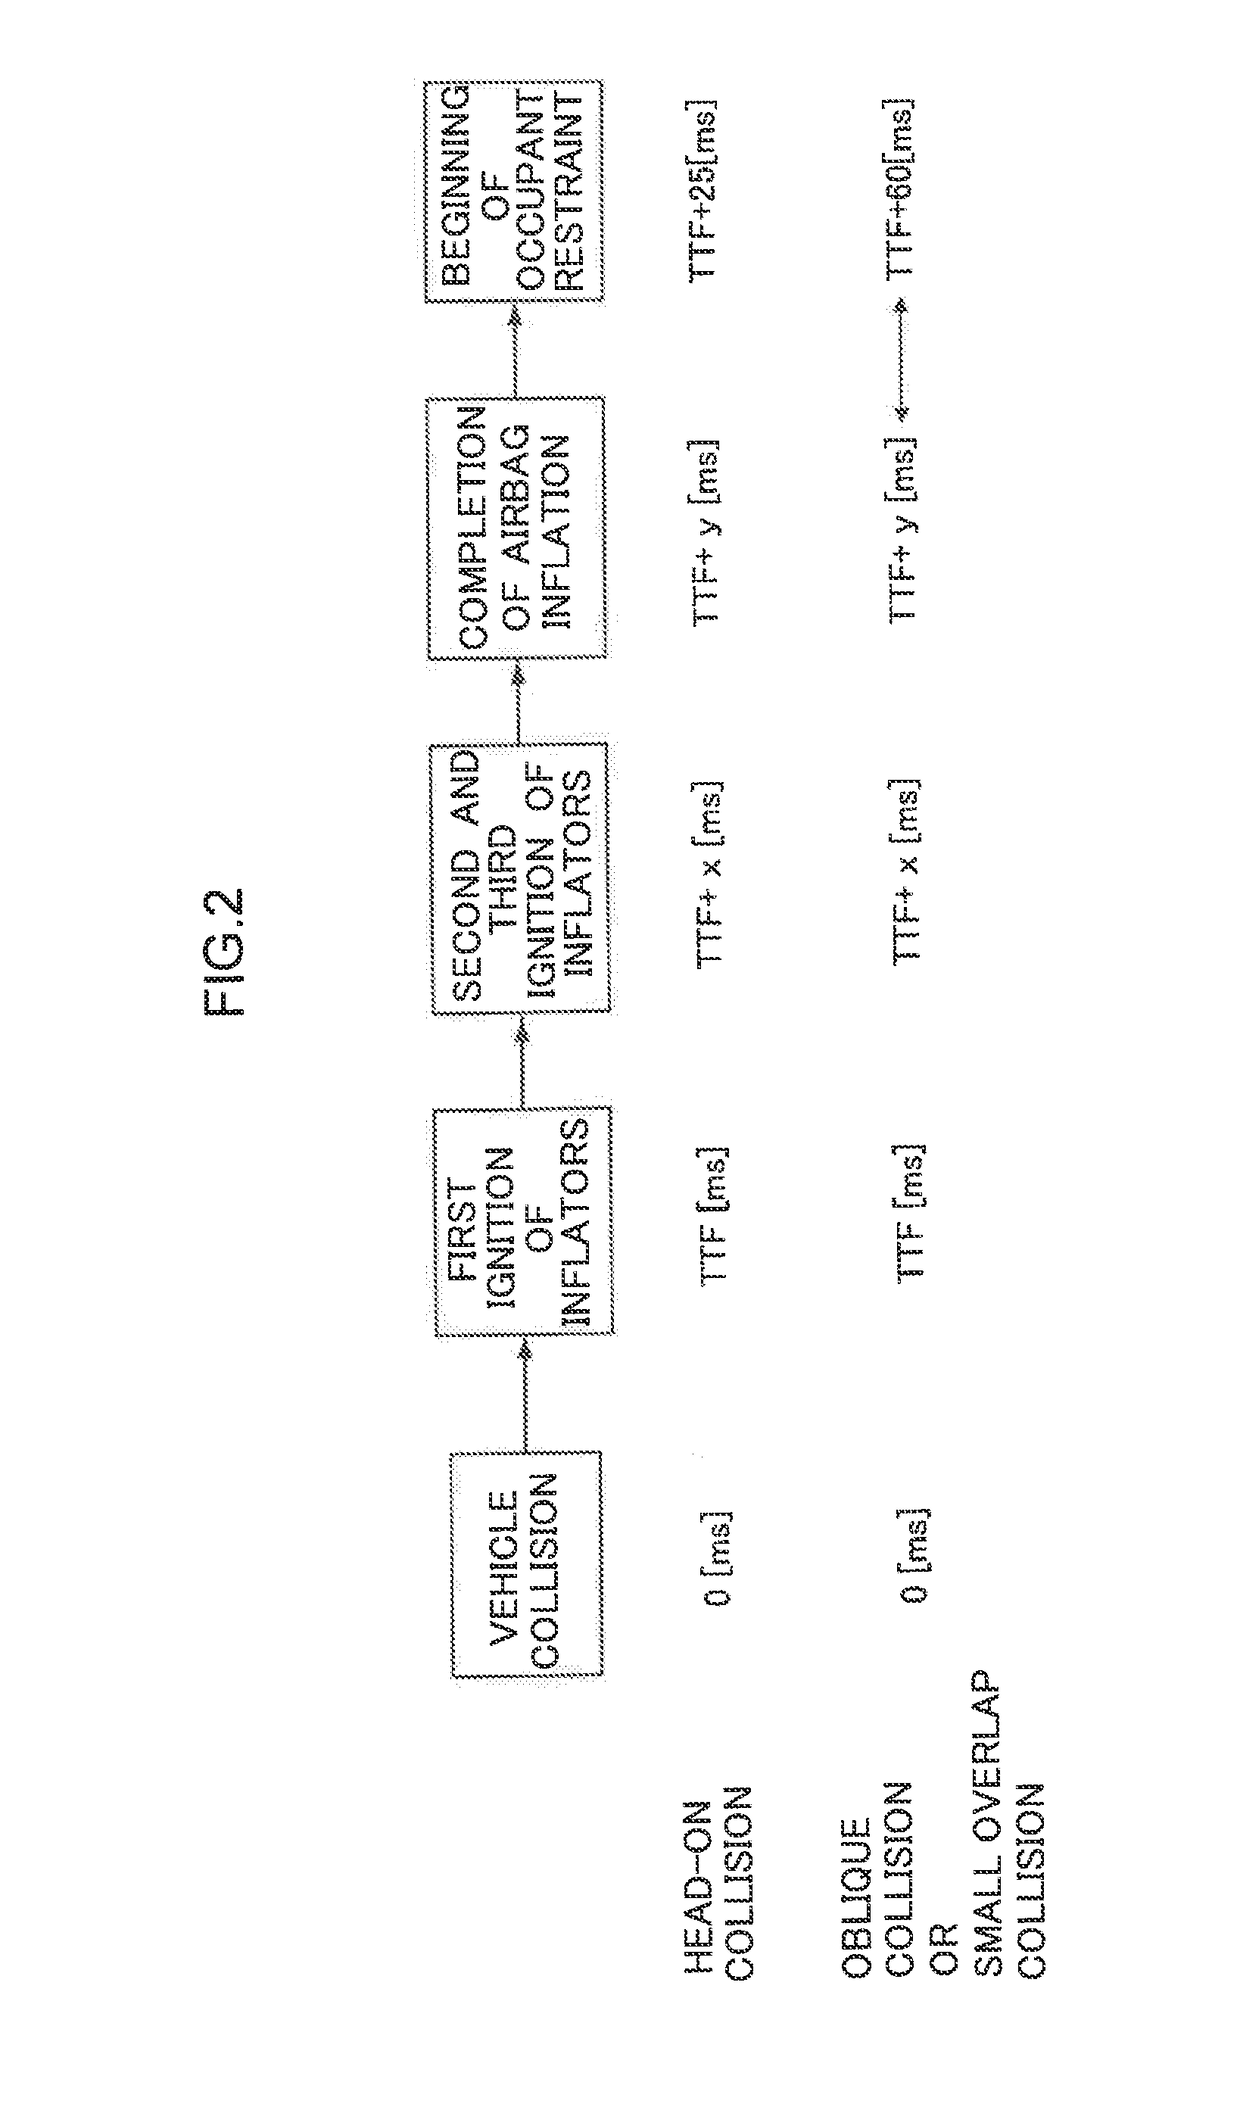 Vehicle front passenger seat airbag device